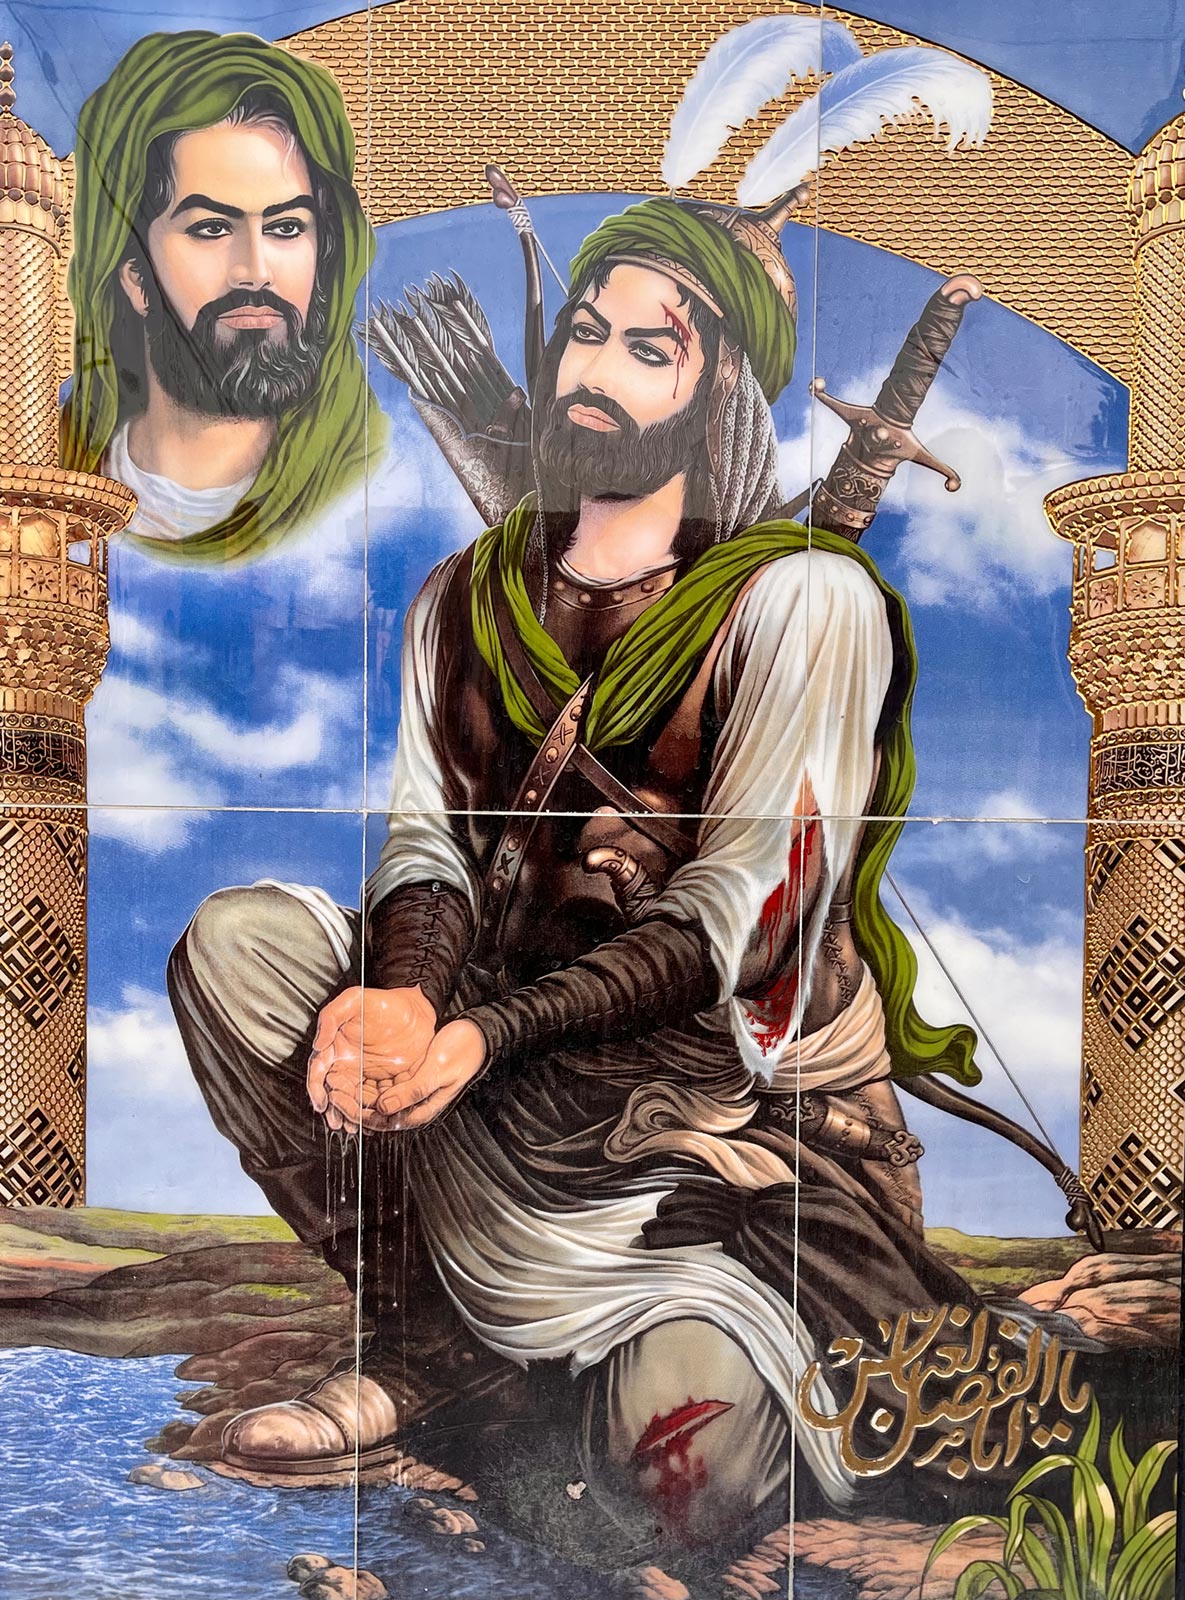 Painting of Abbas, brother of Imam Hussein